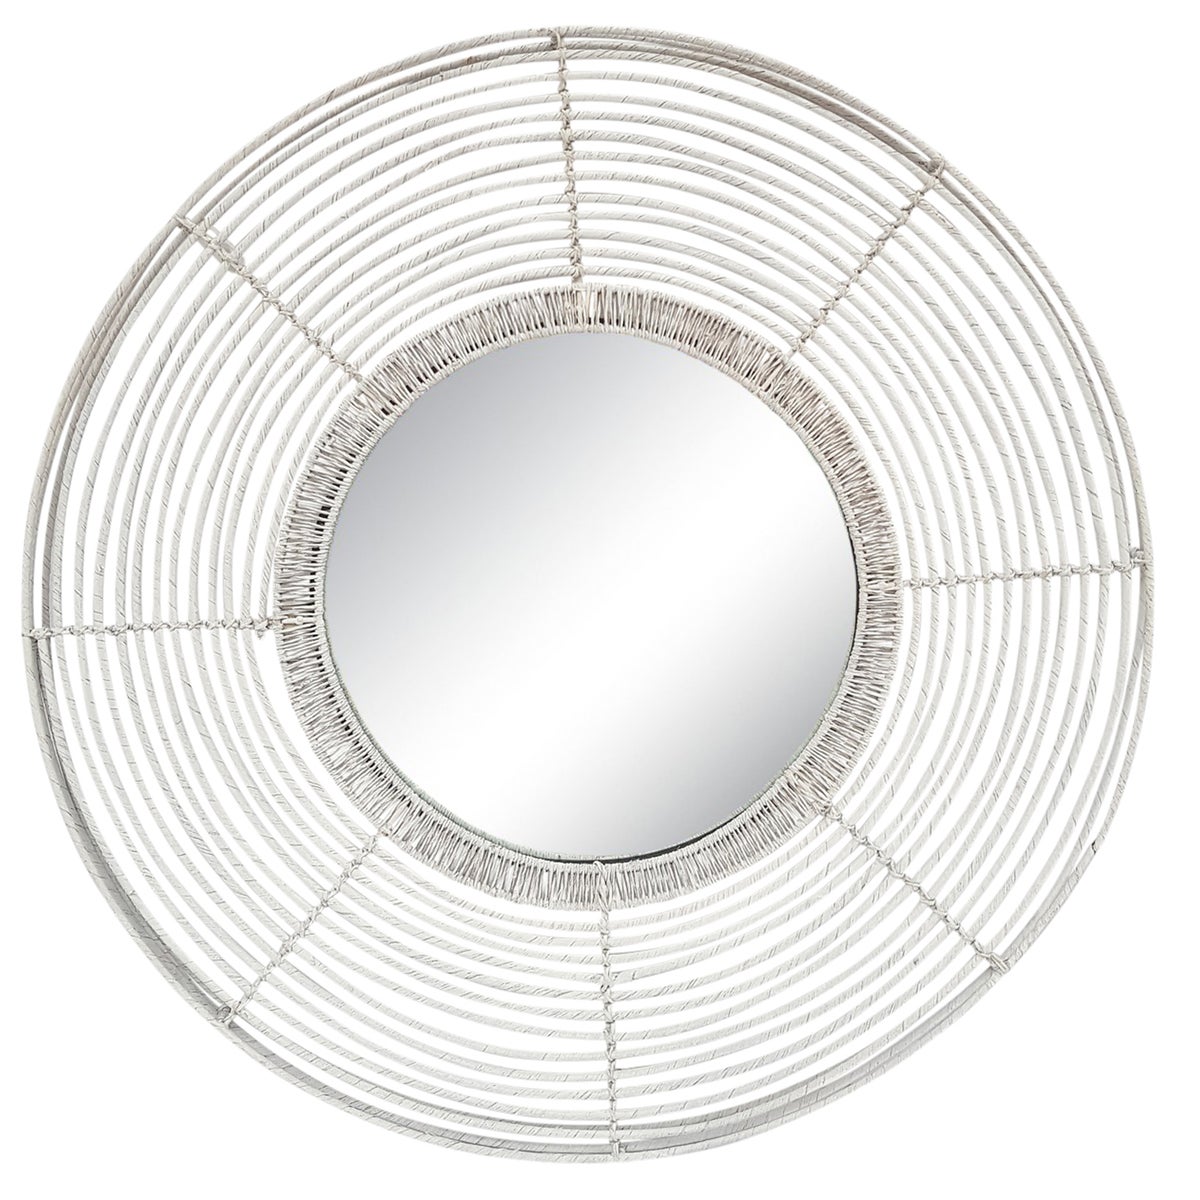 Beehive Round Mirror in White